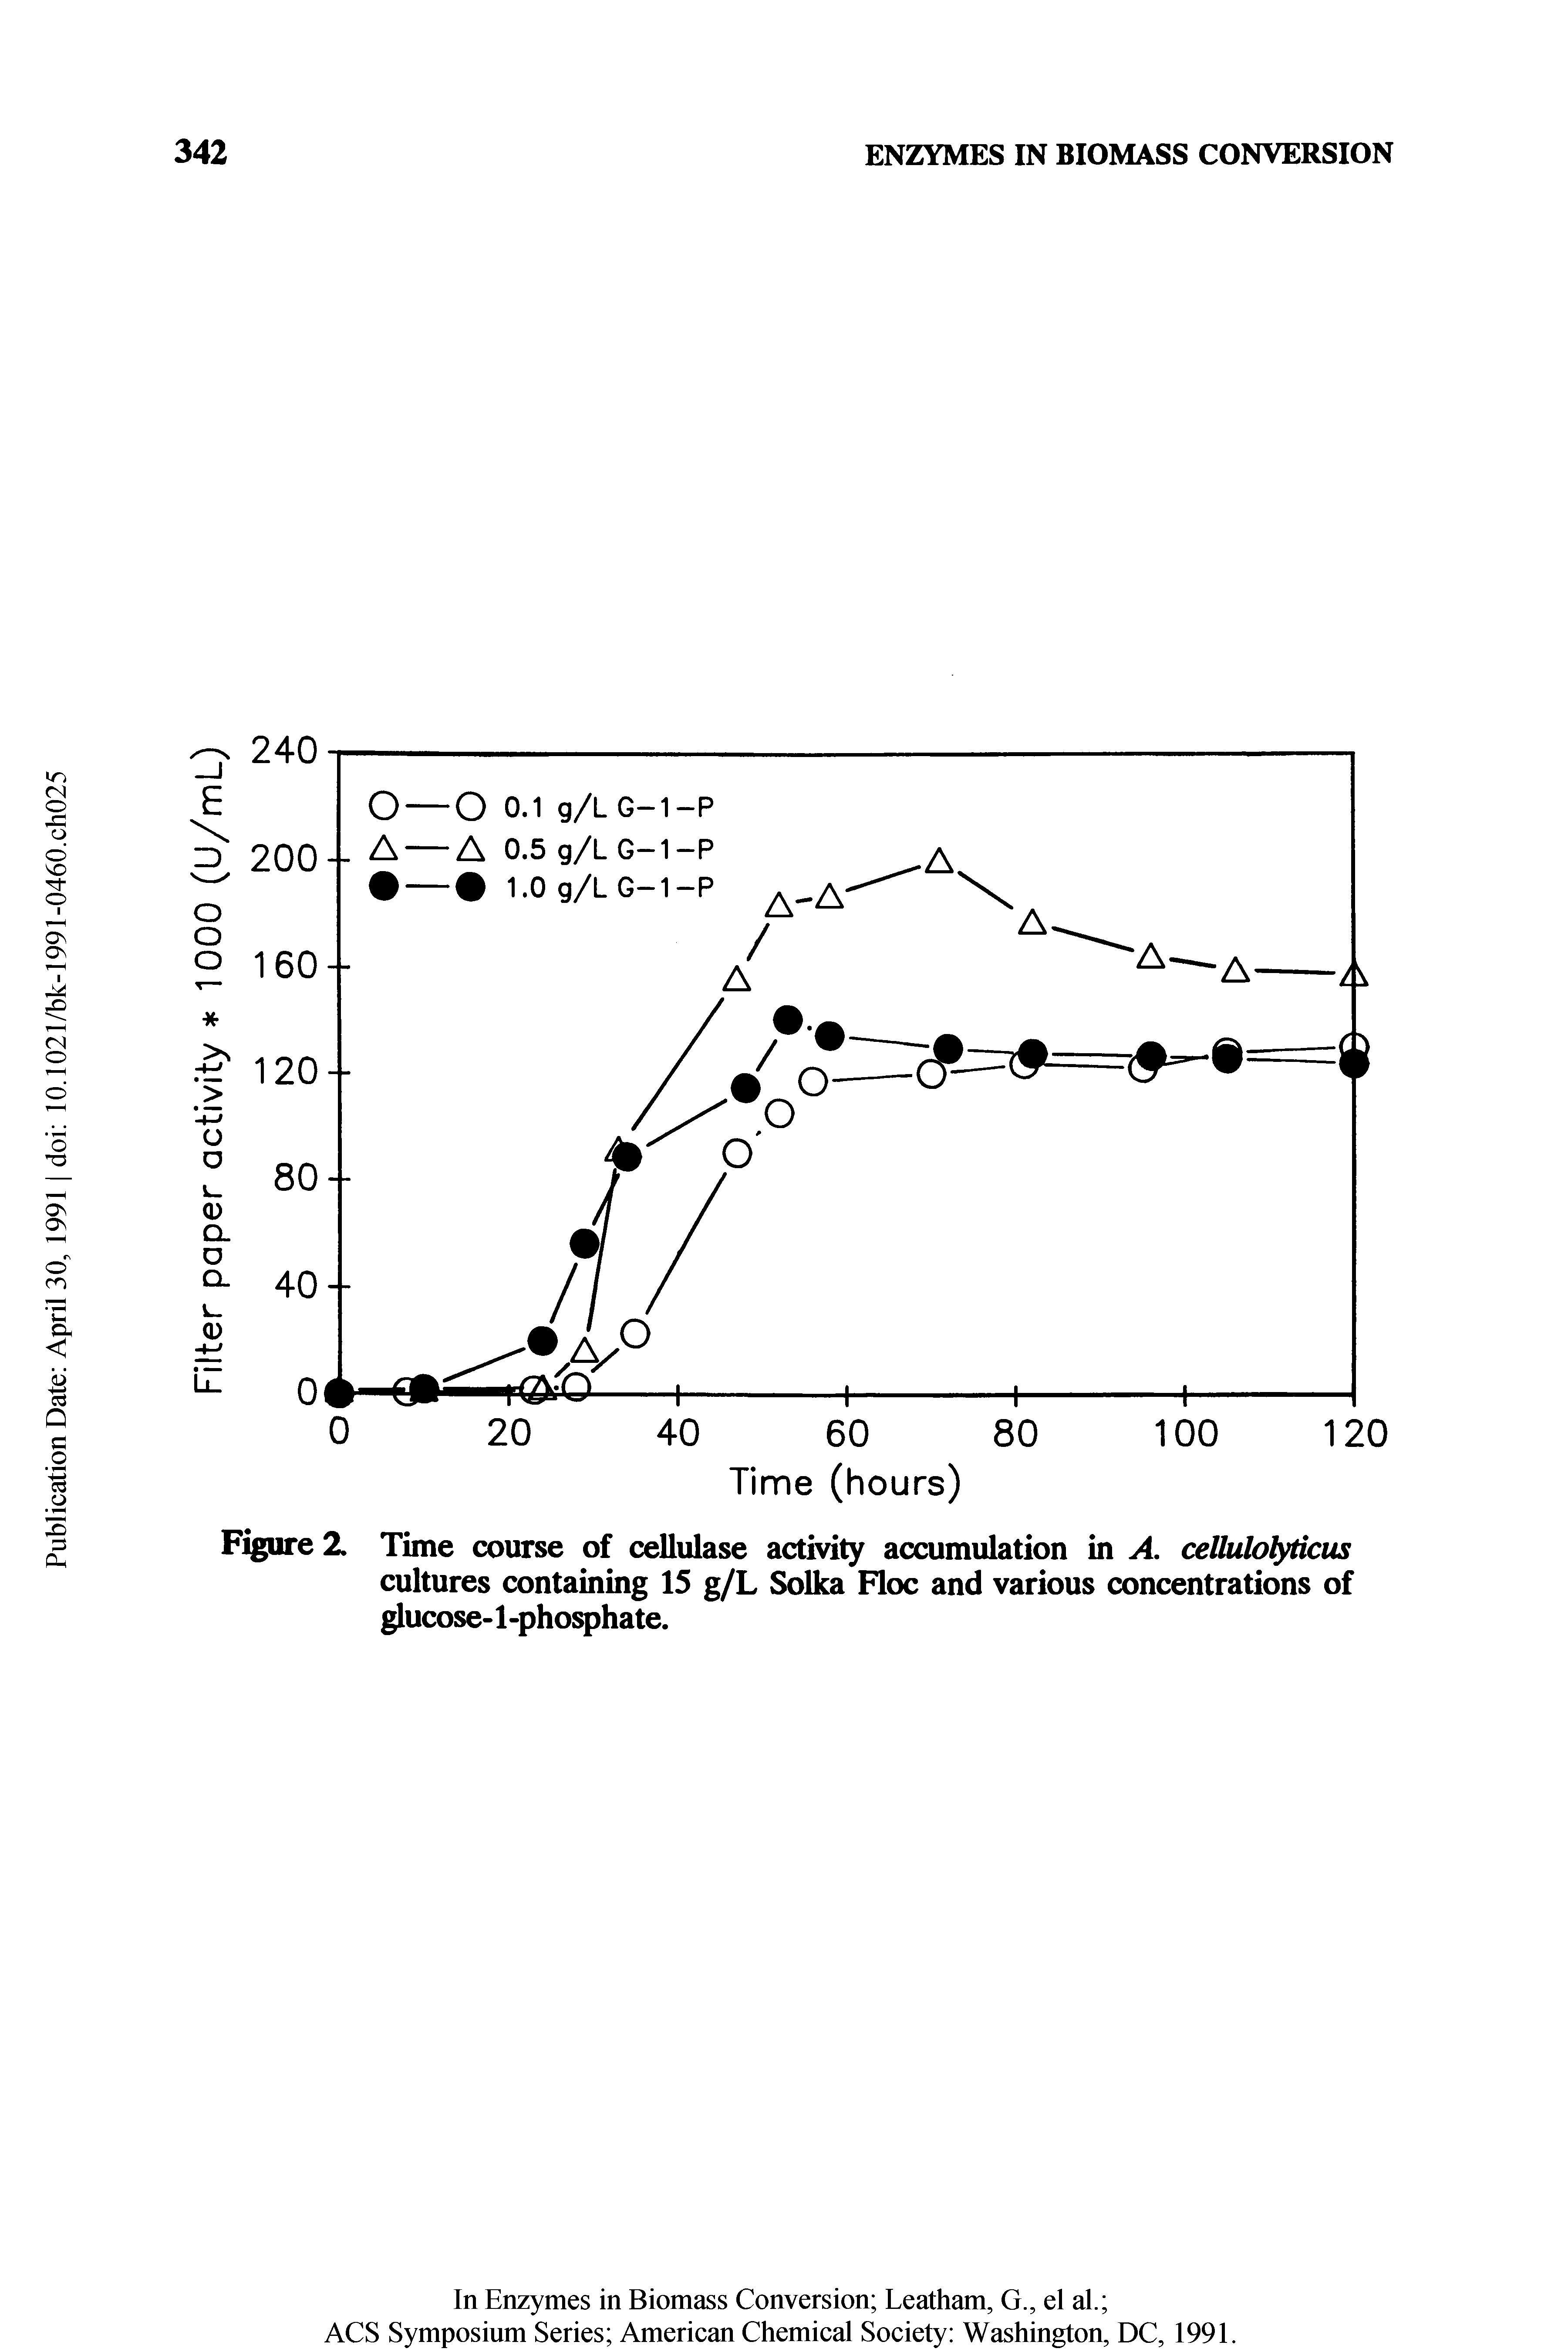 Figure 2. Time course of cellulase activity accumulation in A. cellulofyticus cultures containing 15 g/L Solka Floe and various concentrations of glucose-l-phosphate.